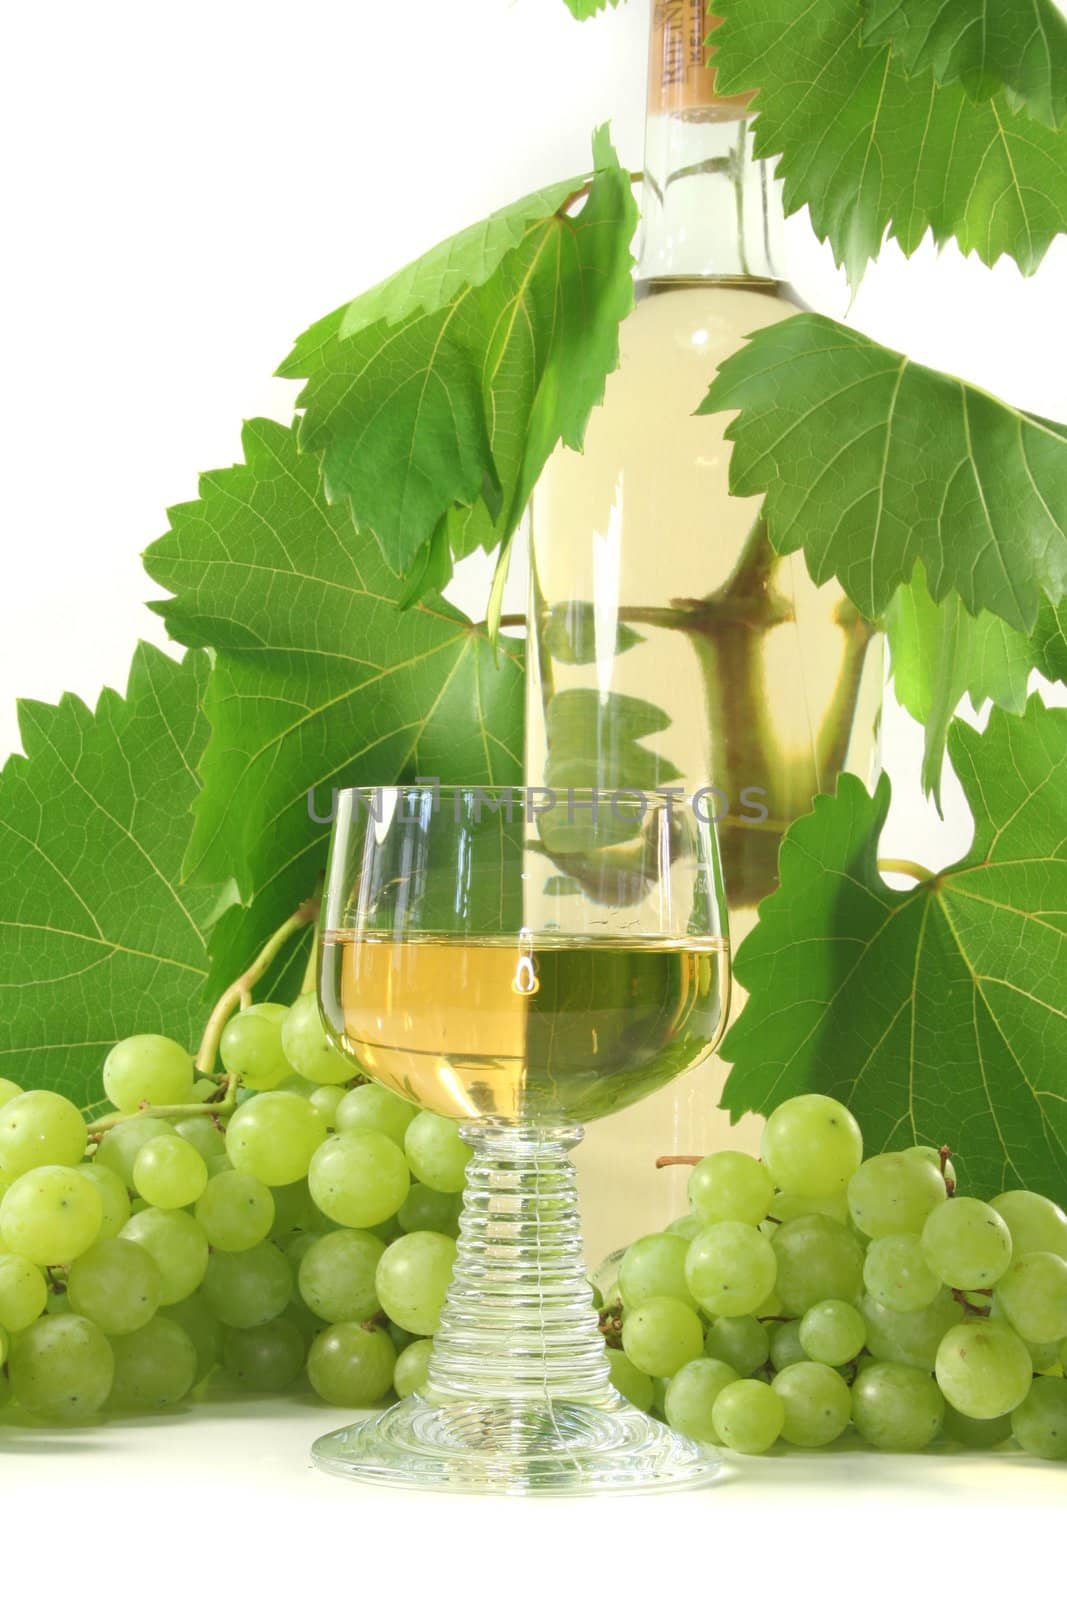 a glass of white wine with bottle, grapes and leaves